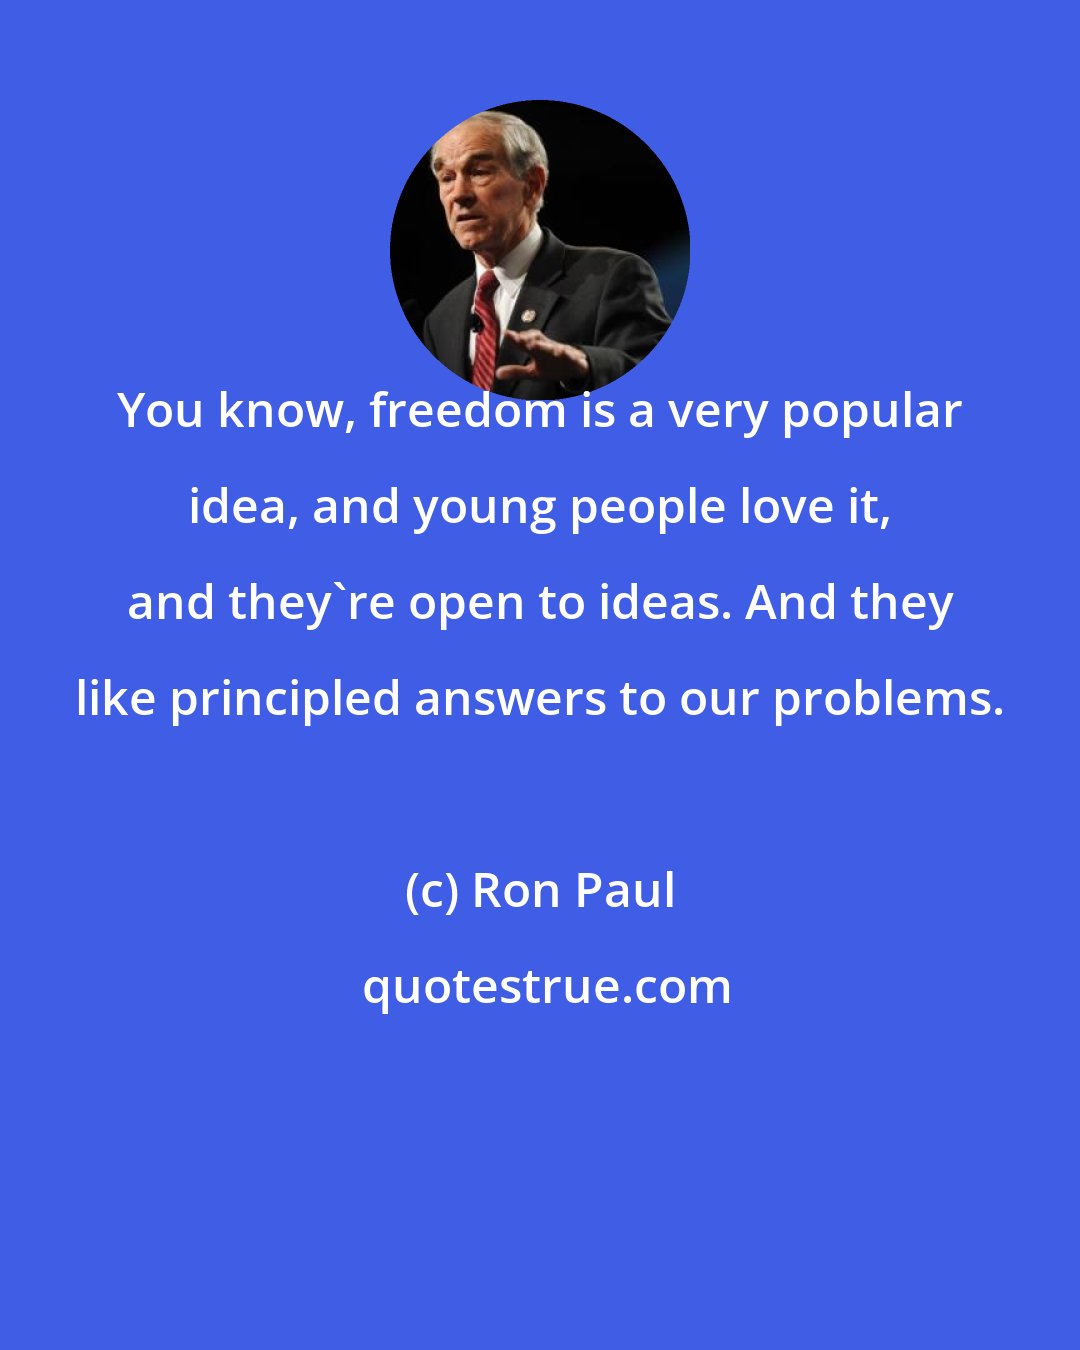 Ron Paul: You know, freedom is a very popular idea, and young people love it, and they're open to ideas. And they like principled answers to our problems.